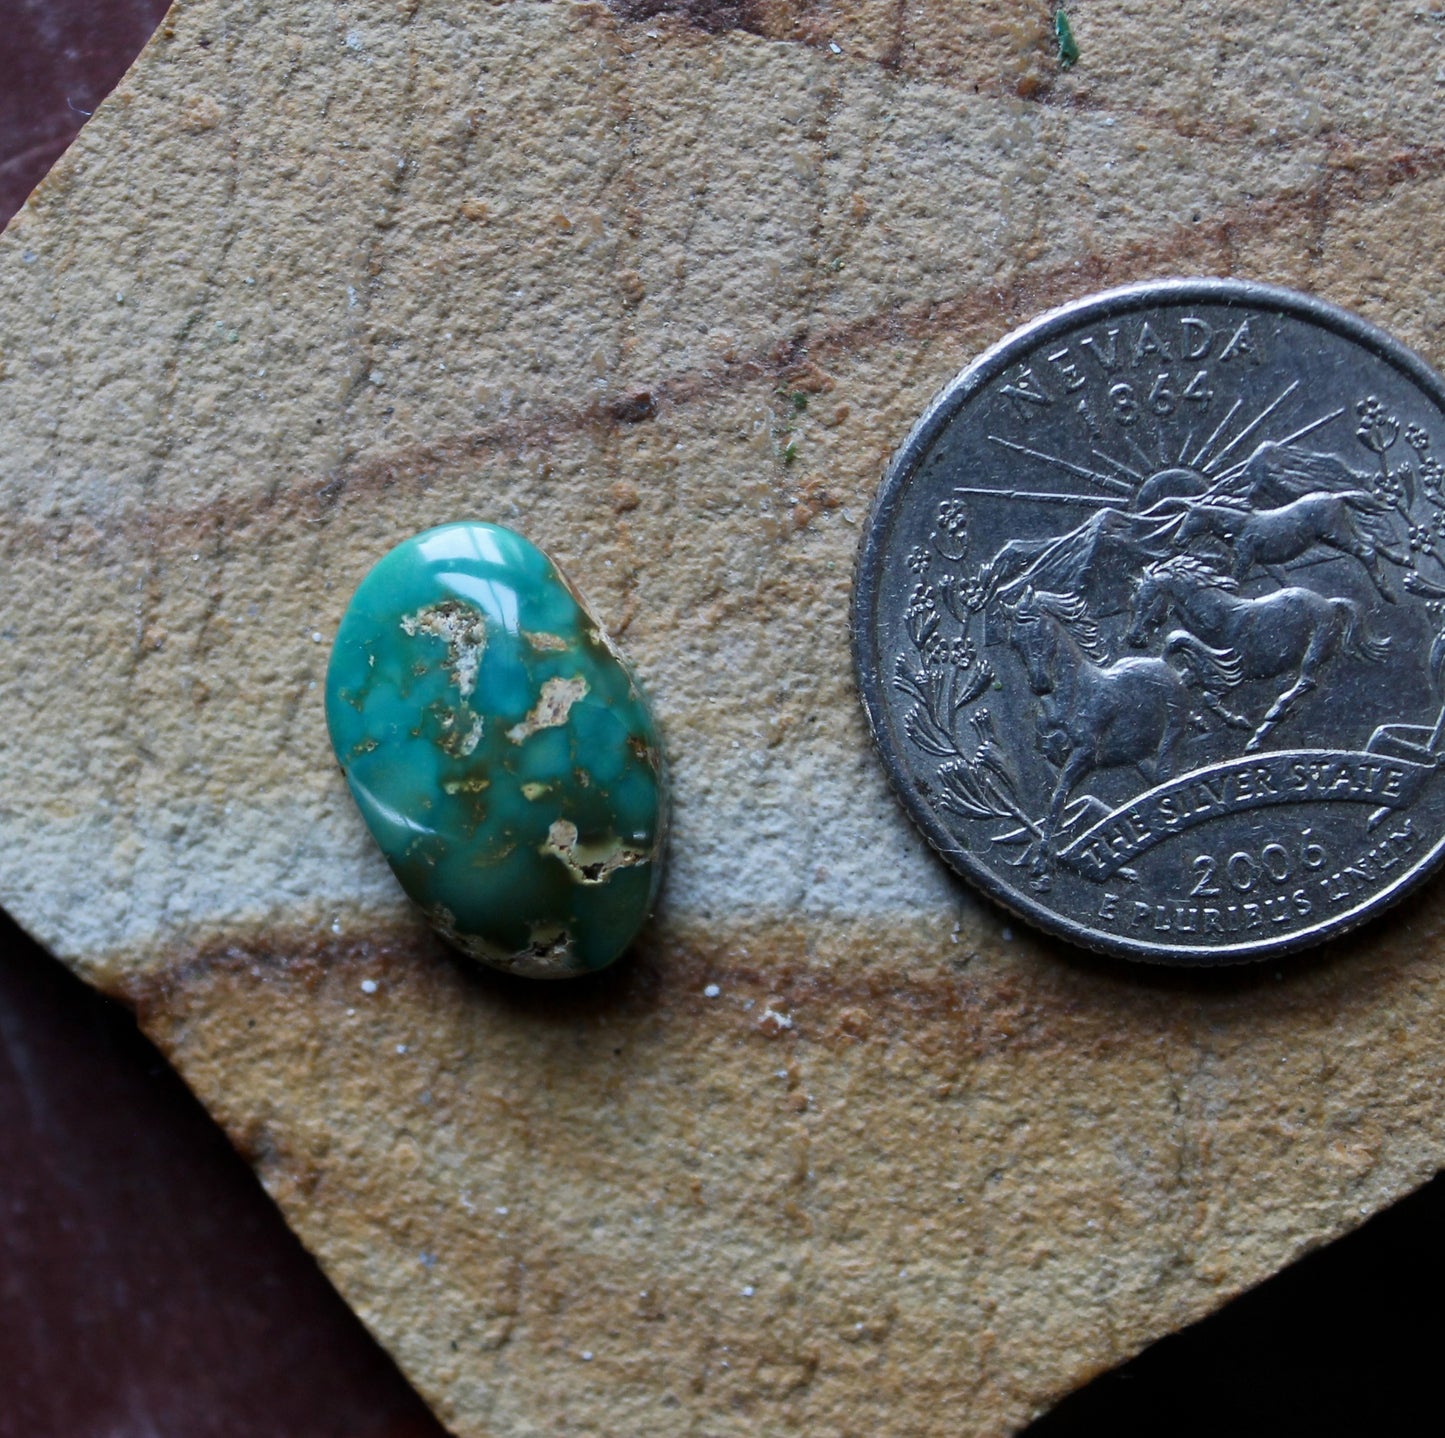 6 carat teal green Stone Mountain Turquoise cabochon